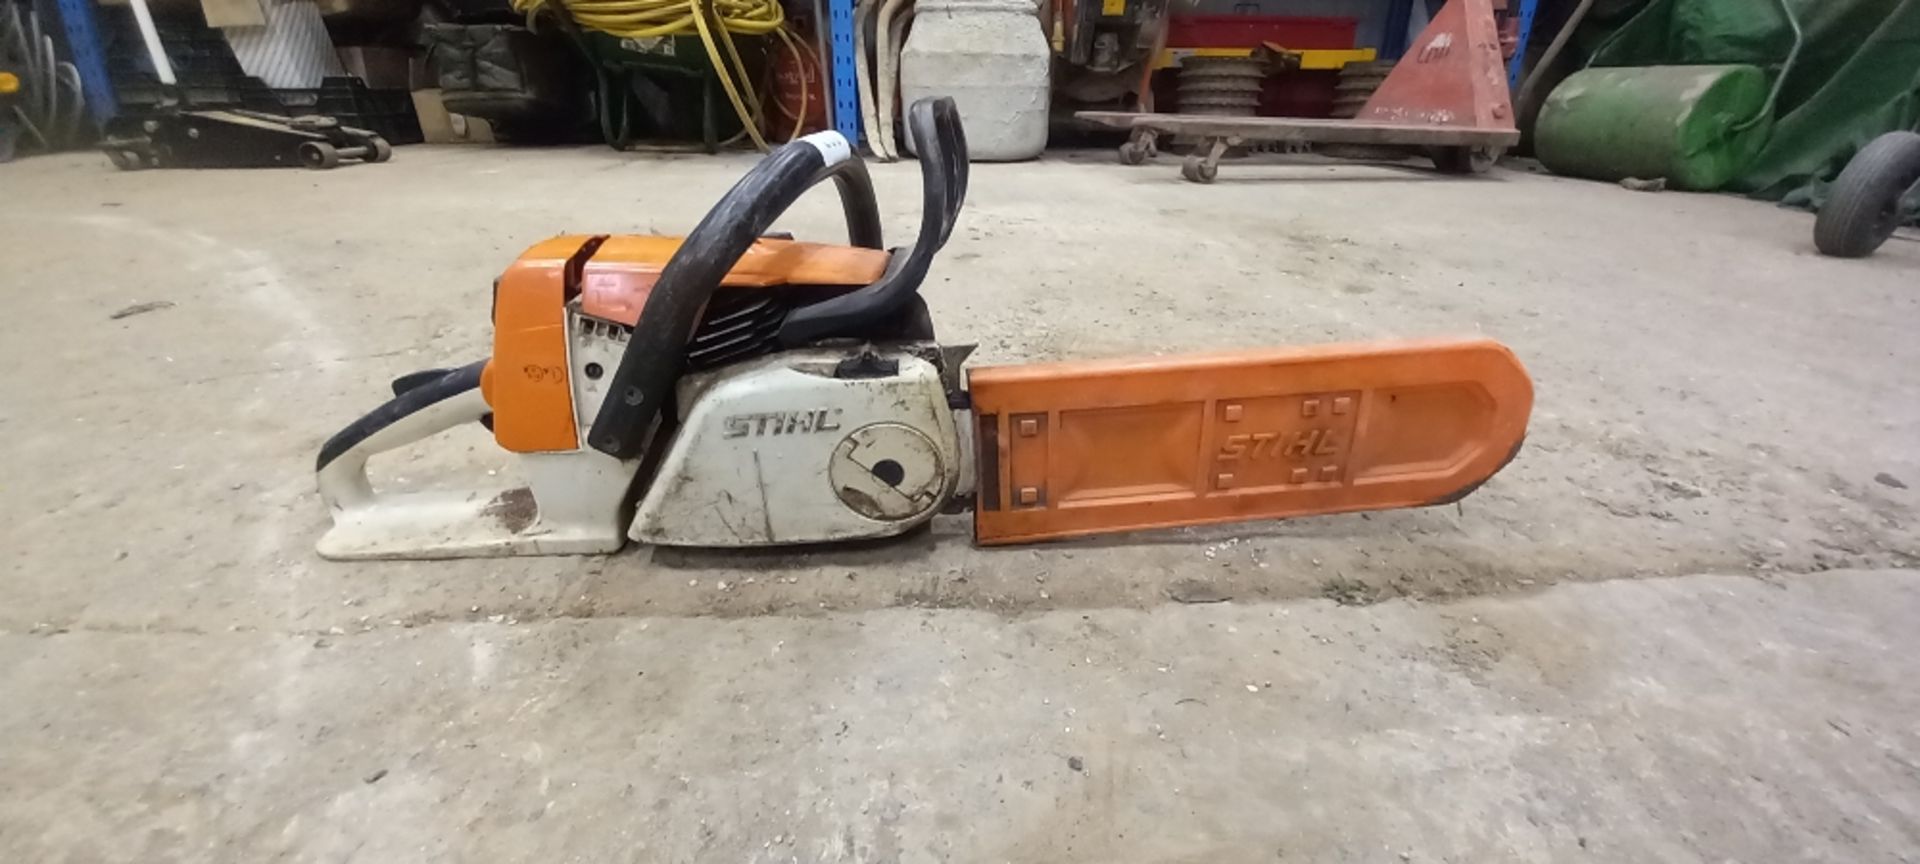 Stihl MS 260 Robust Chainsaw - Image 2 of 4